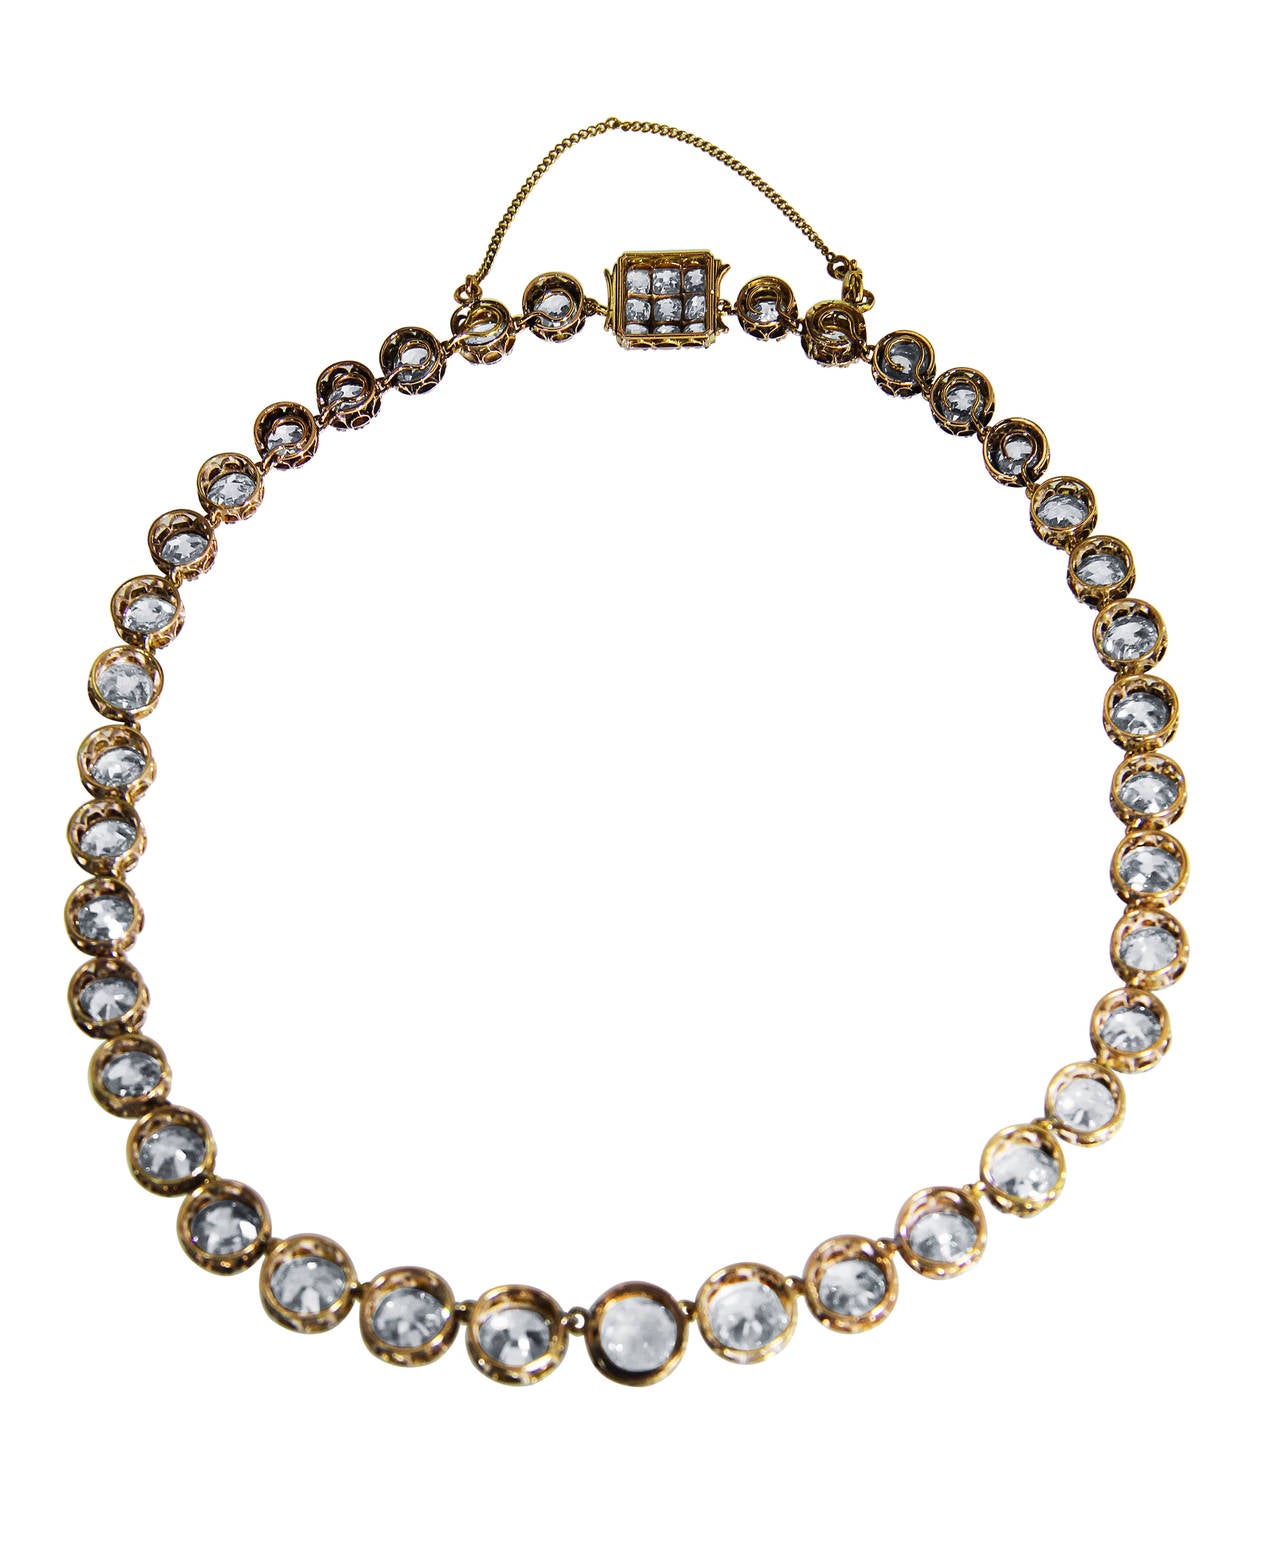 A stunning antique gold and silver diamond rivière necklace, of graduated design set with 47 old mine-cut diamonds weighing a total of approximately 45.00 carats, gross weight 28.3 grams, length 14 inches, clasp is removable from both sides.  This